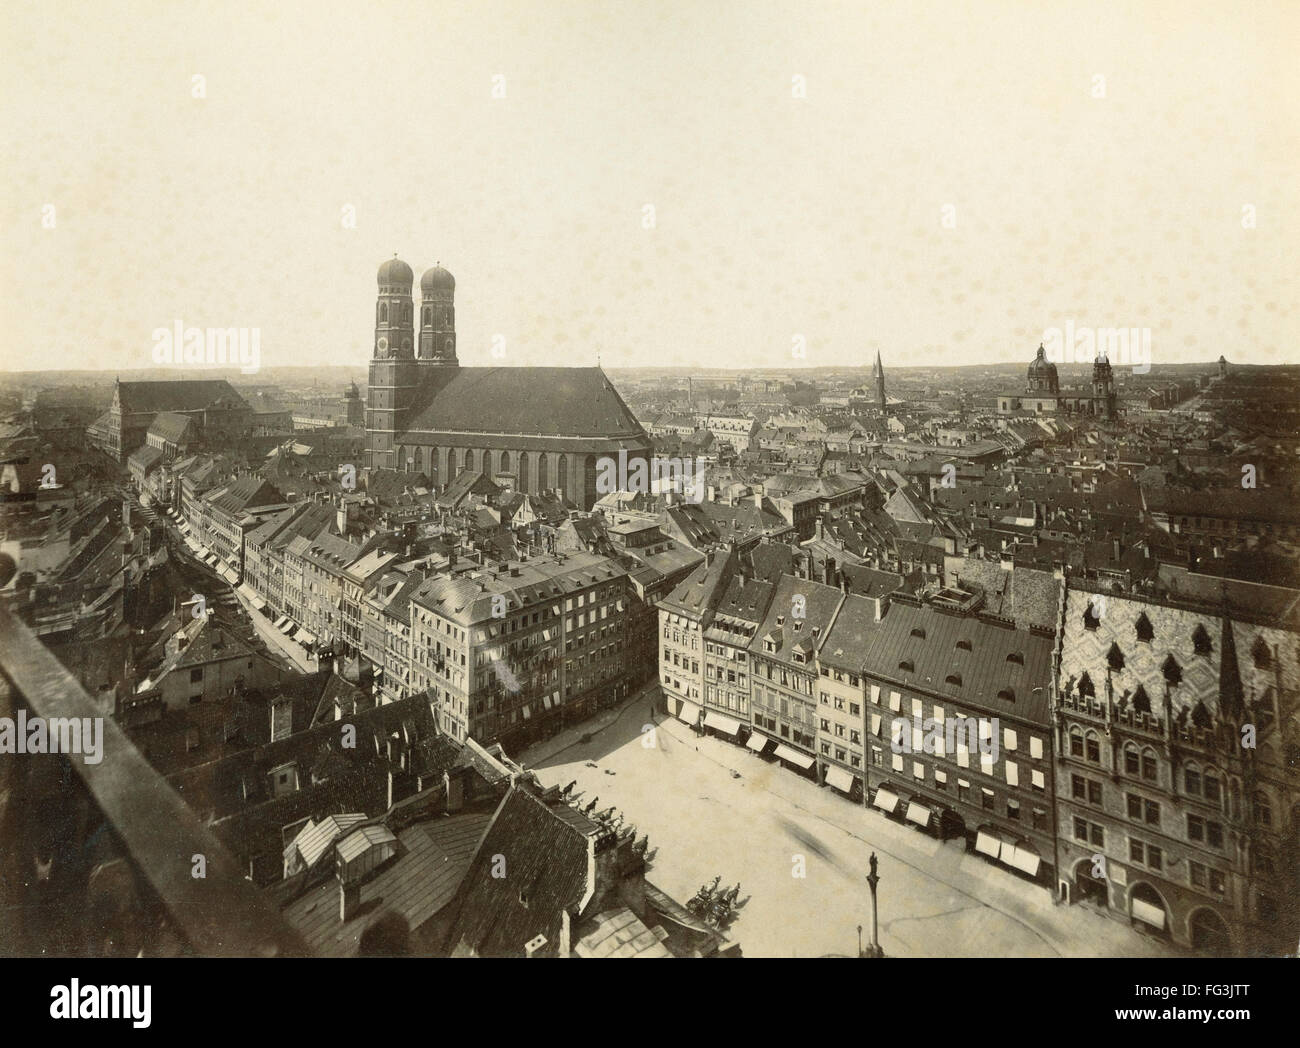 GERMANY: MUNICH. /nView of the Marienplatz, New Town Hall and the Frauenkirche in Munich, Germany. Photograph, late 19th century. Stock Photo